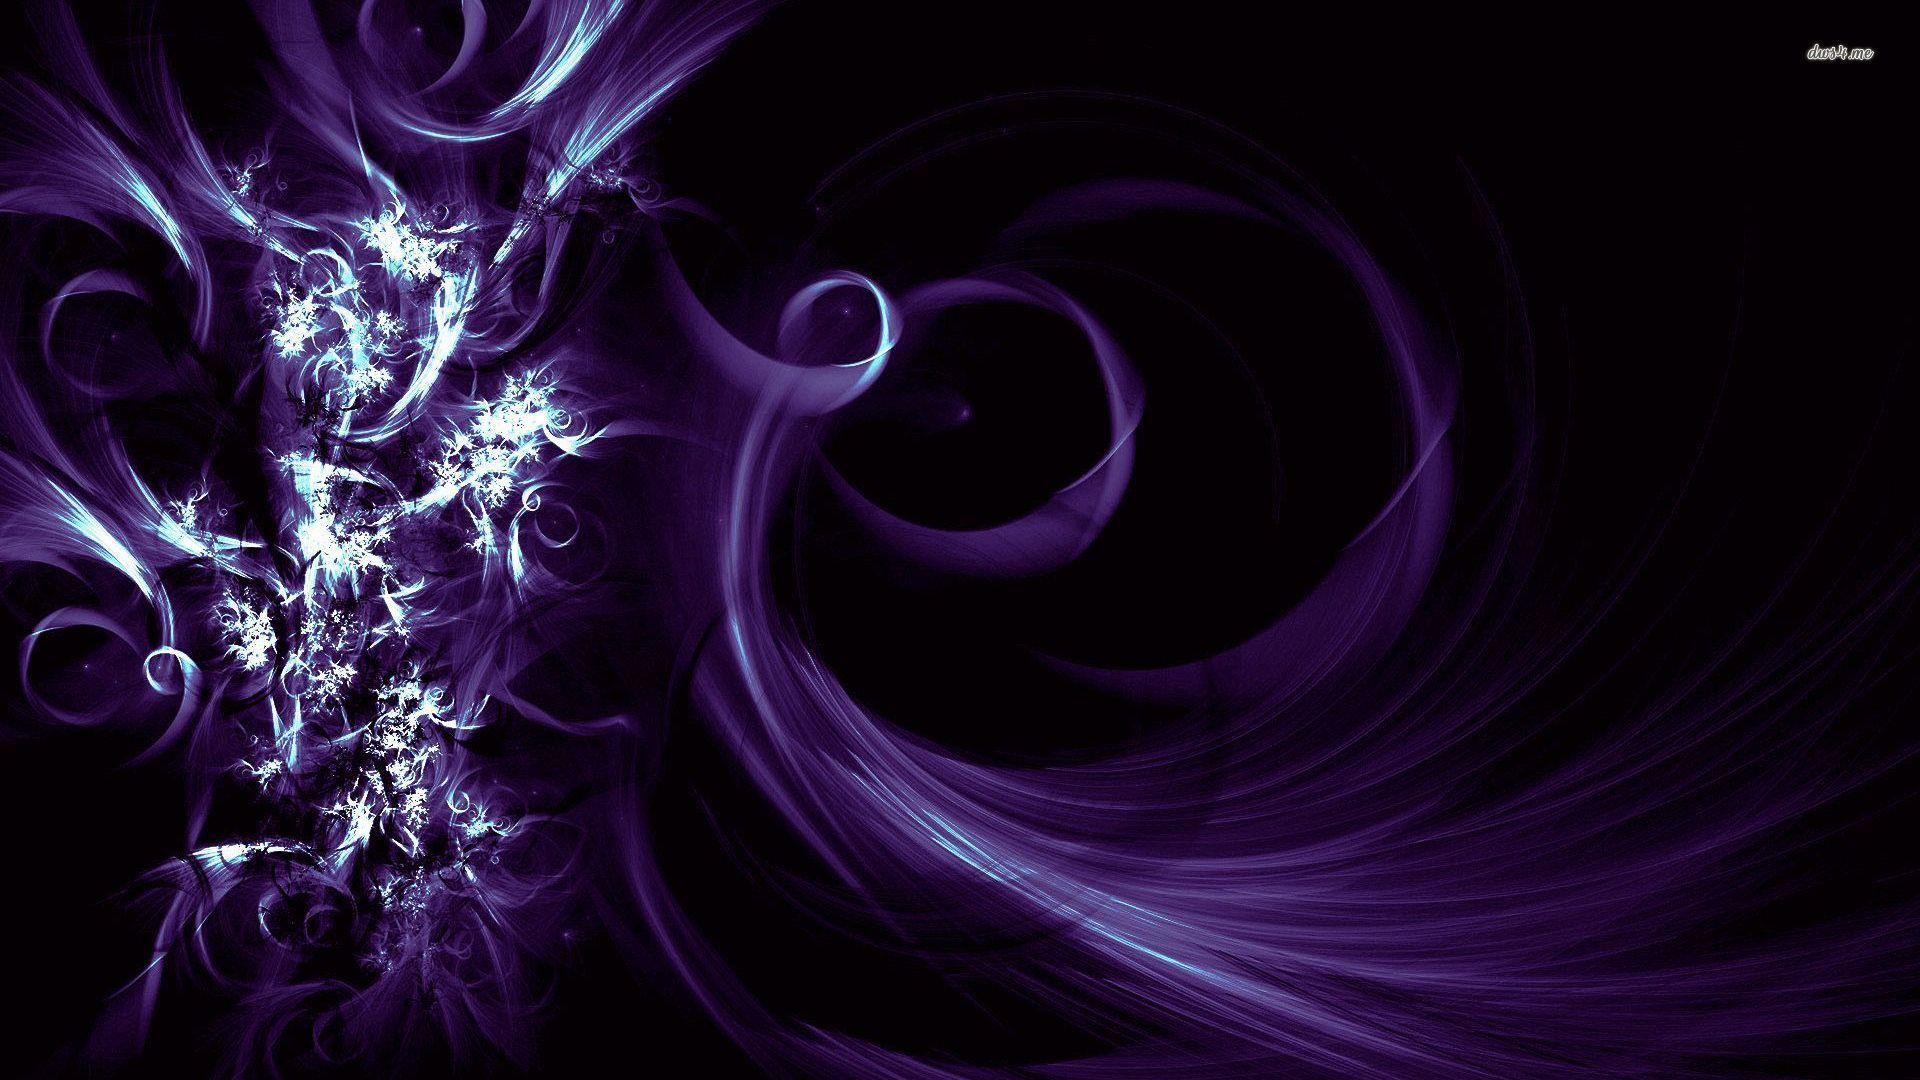 Black and Purple Abstract Wallpapers - Top Free Black and Purple